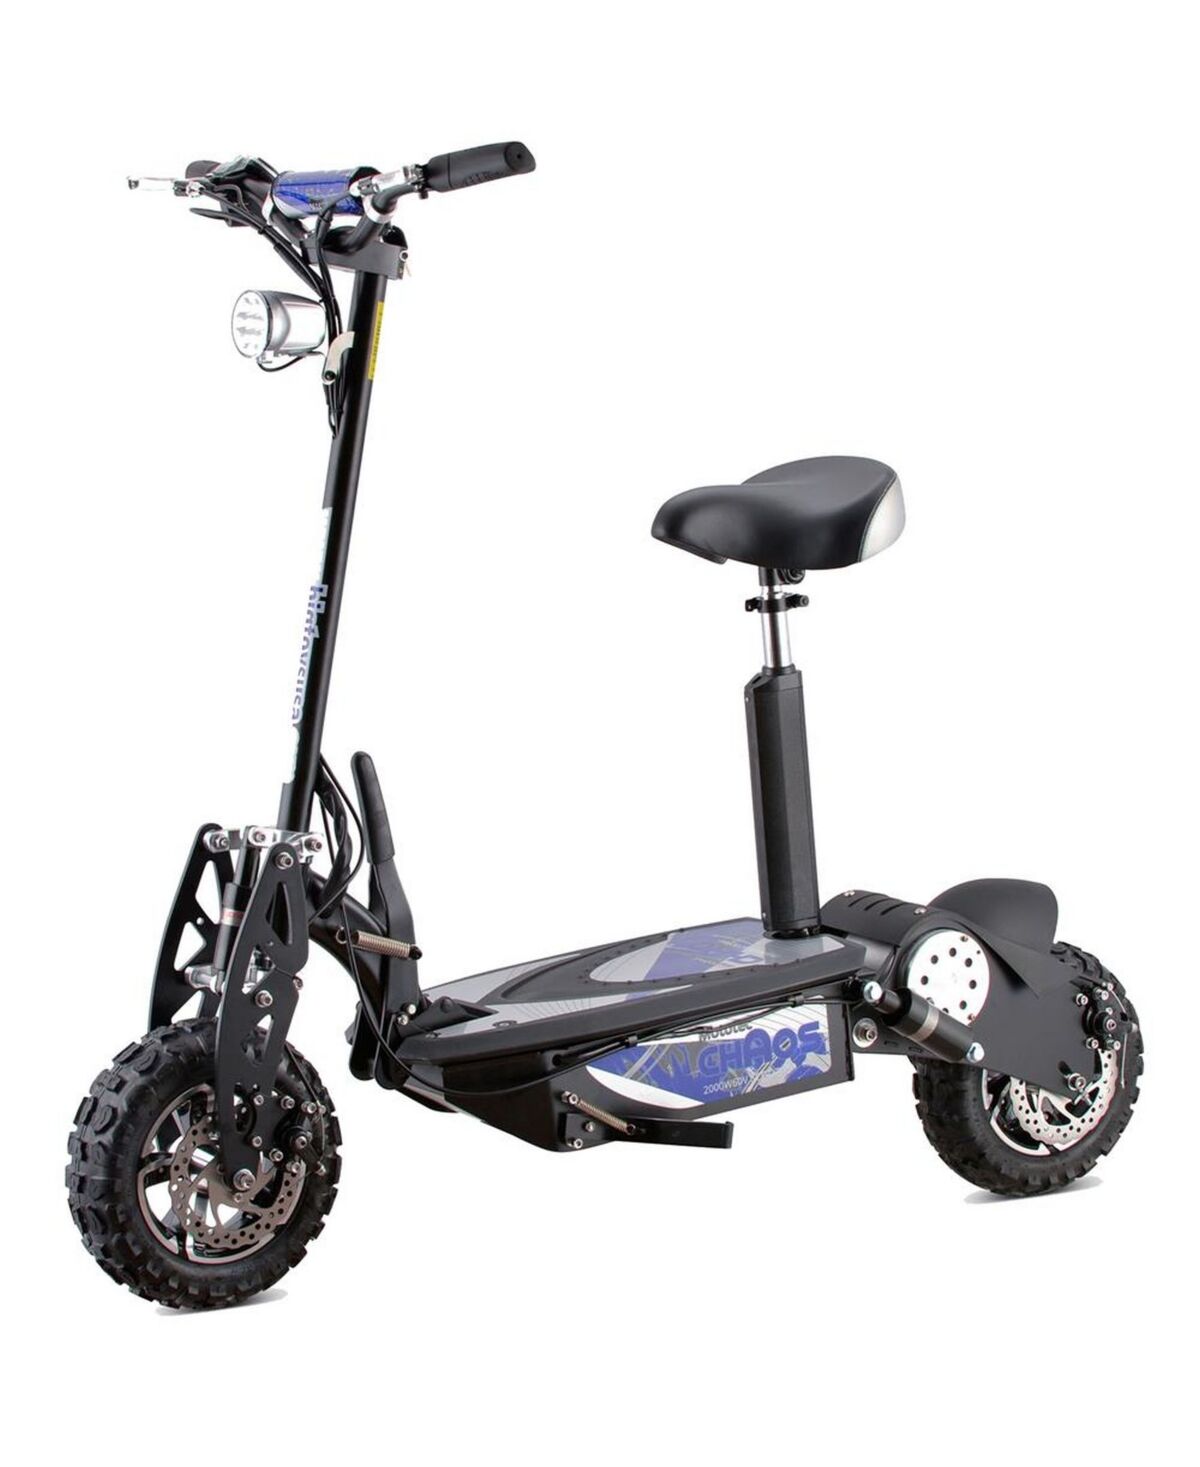 Mototec Chaos 2000W 60V Lithium Electric Scooter - Black